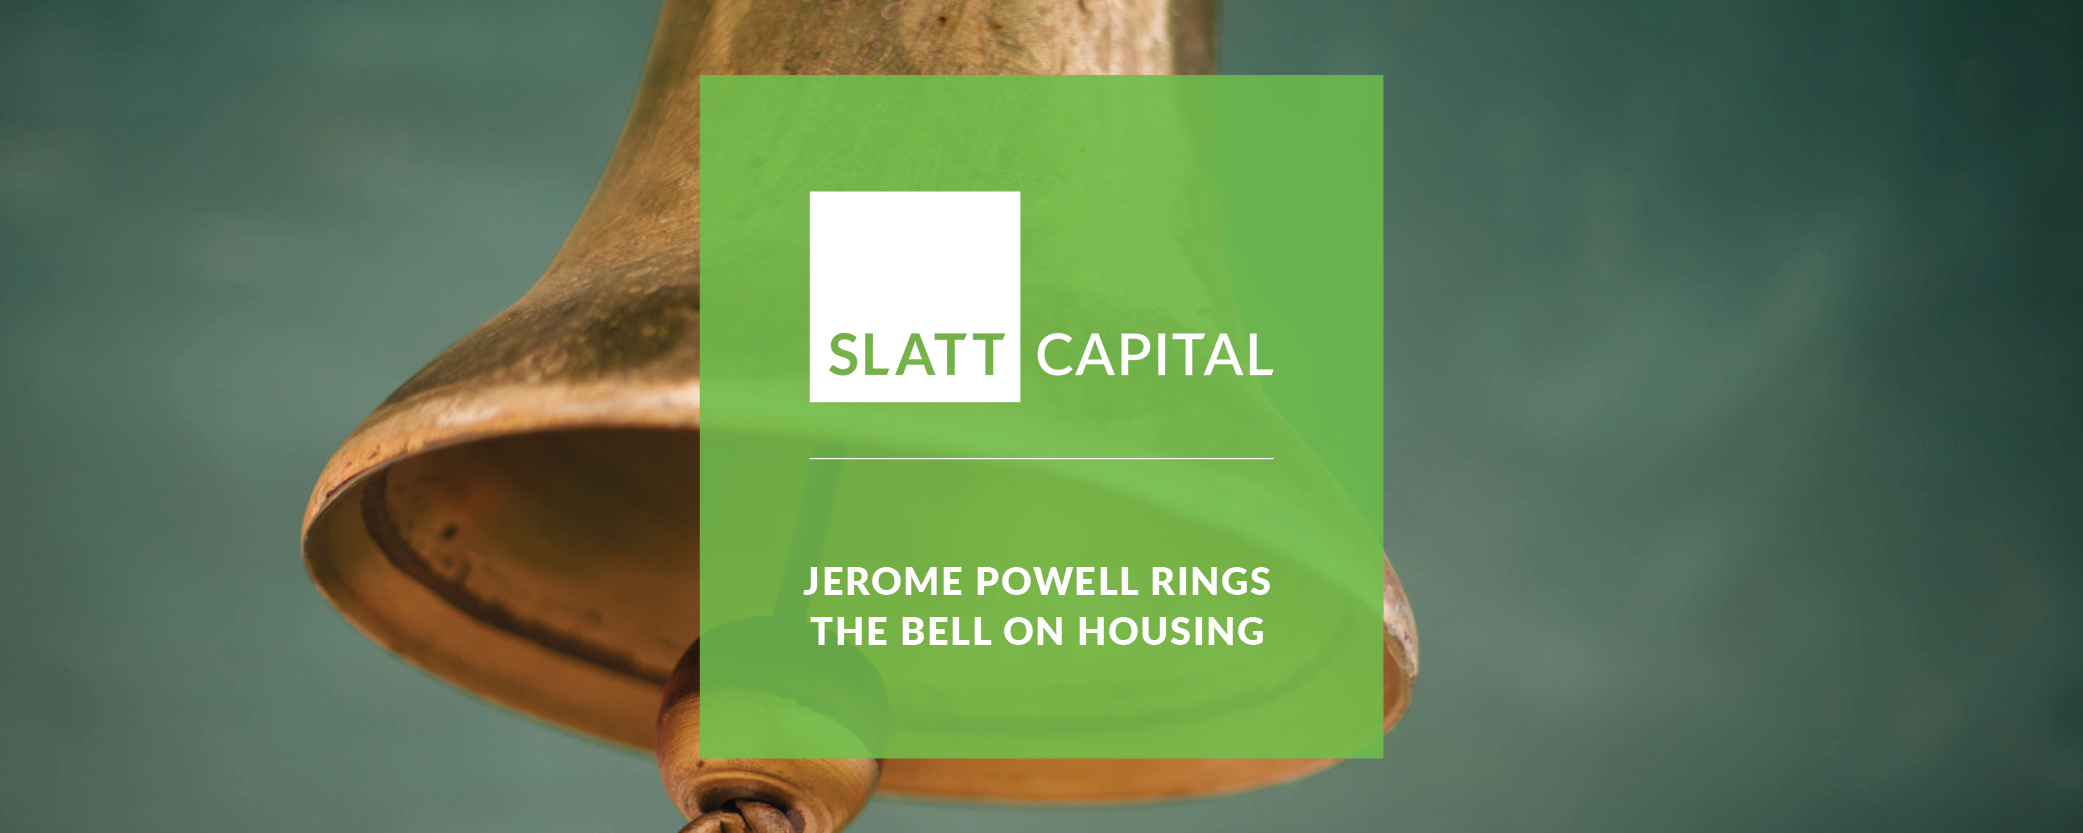 Jerome powell rings the bell on housing